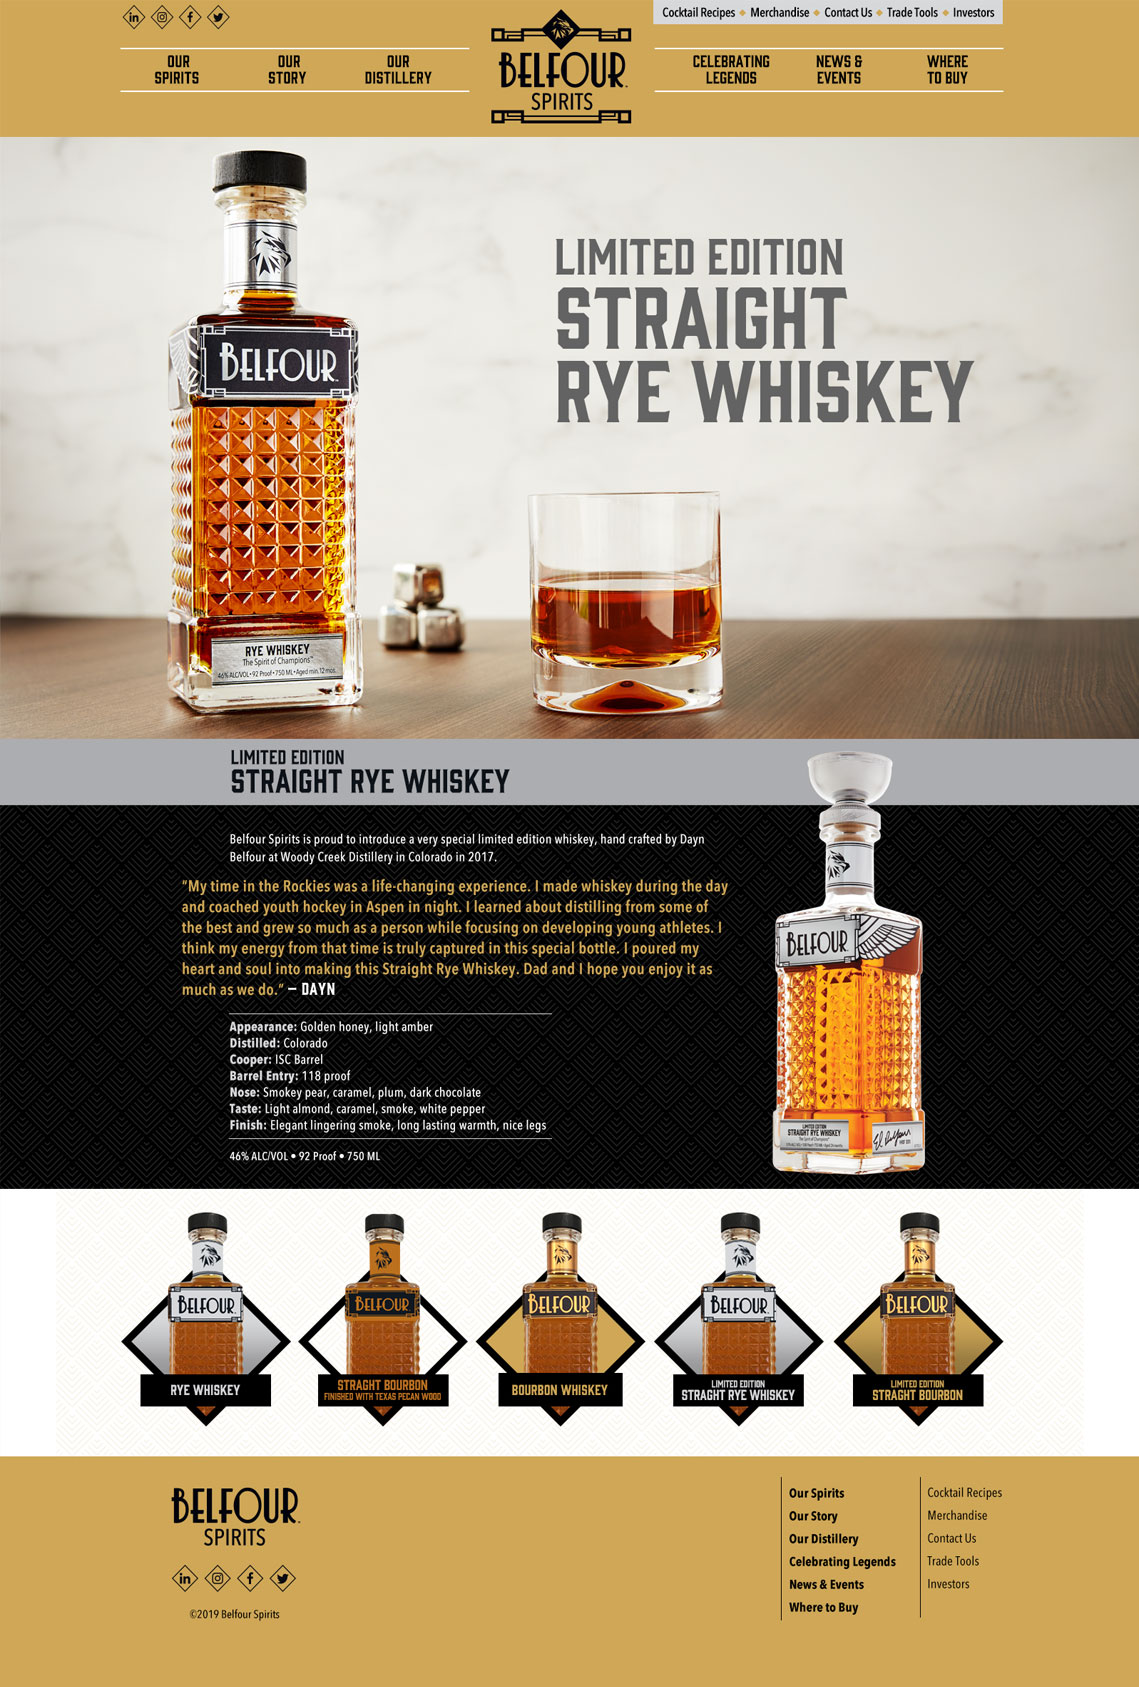 Product page of website featuring information and imagery of the Limited Edition Rye Whiskey